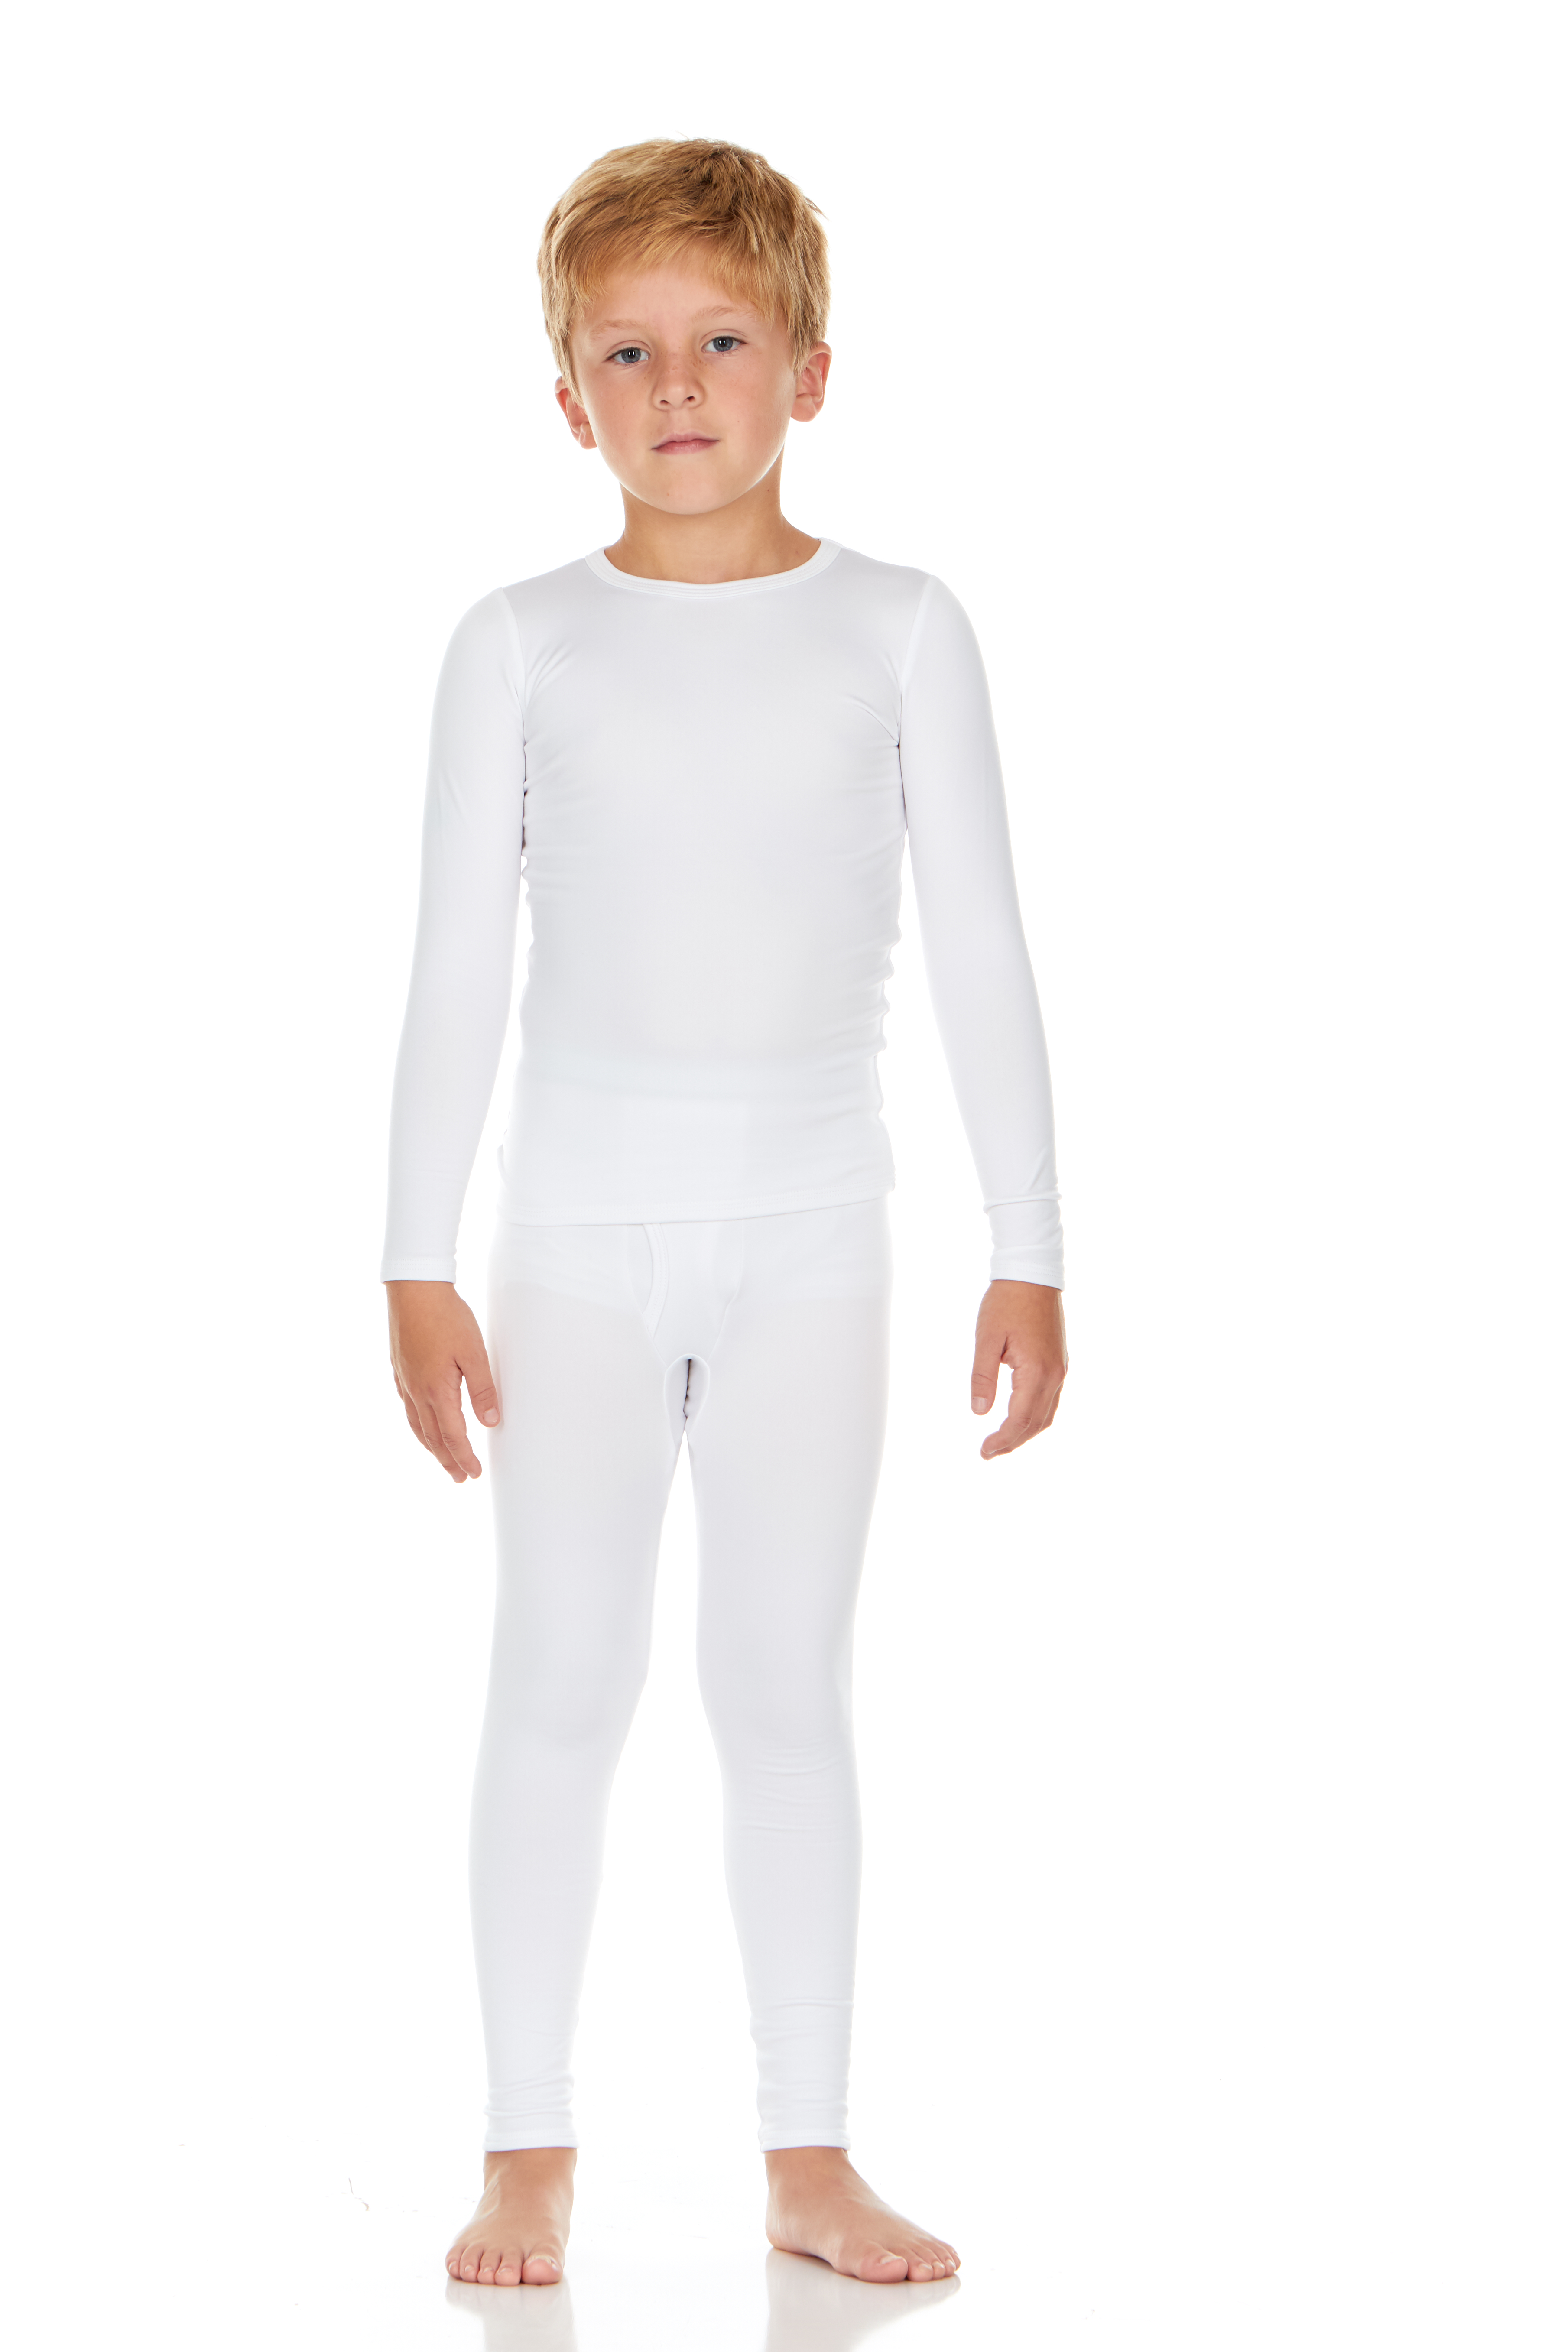 Thermajohn Boys Ultra Soft Thermal Underwear Long Johns Set with Fleece Lined